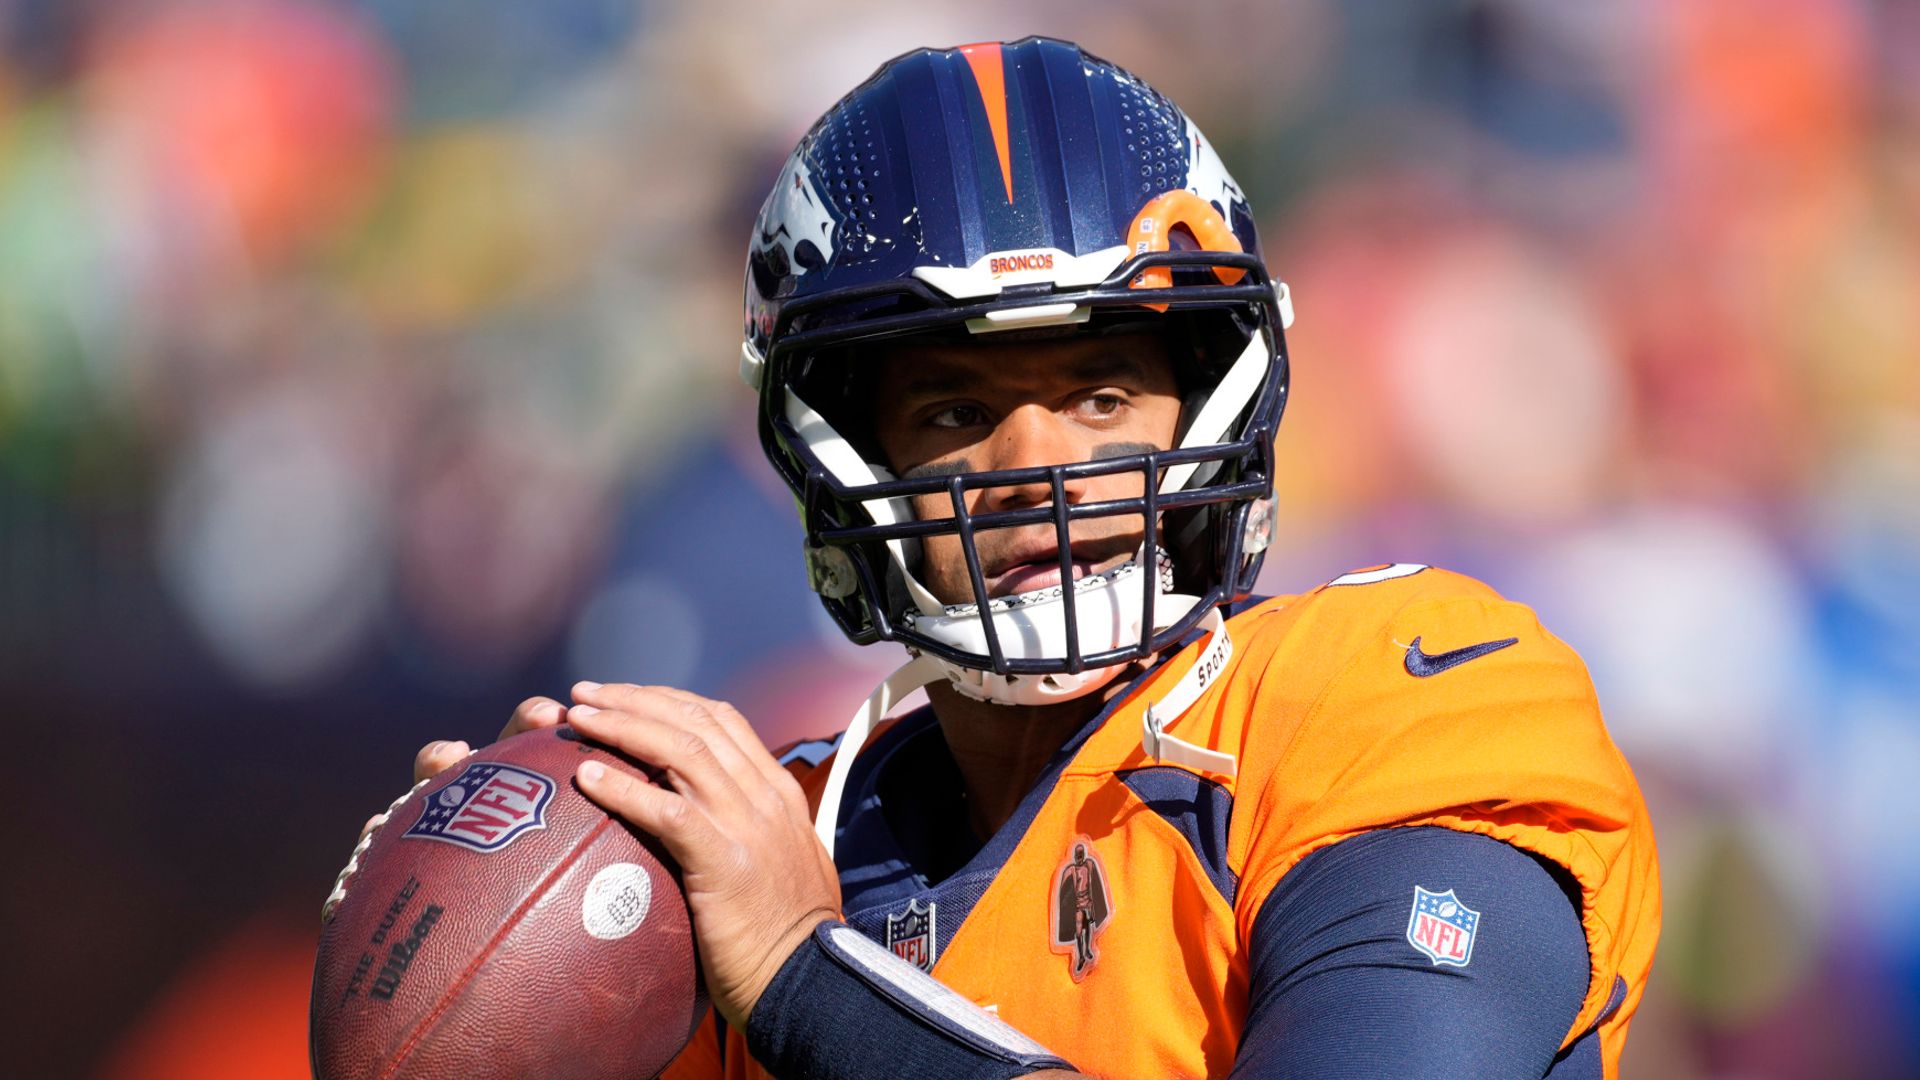 Wilson benched by Broncos for rest of NFL season